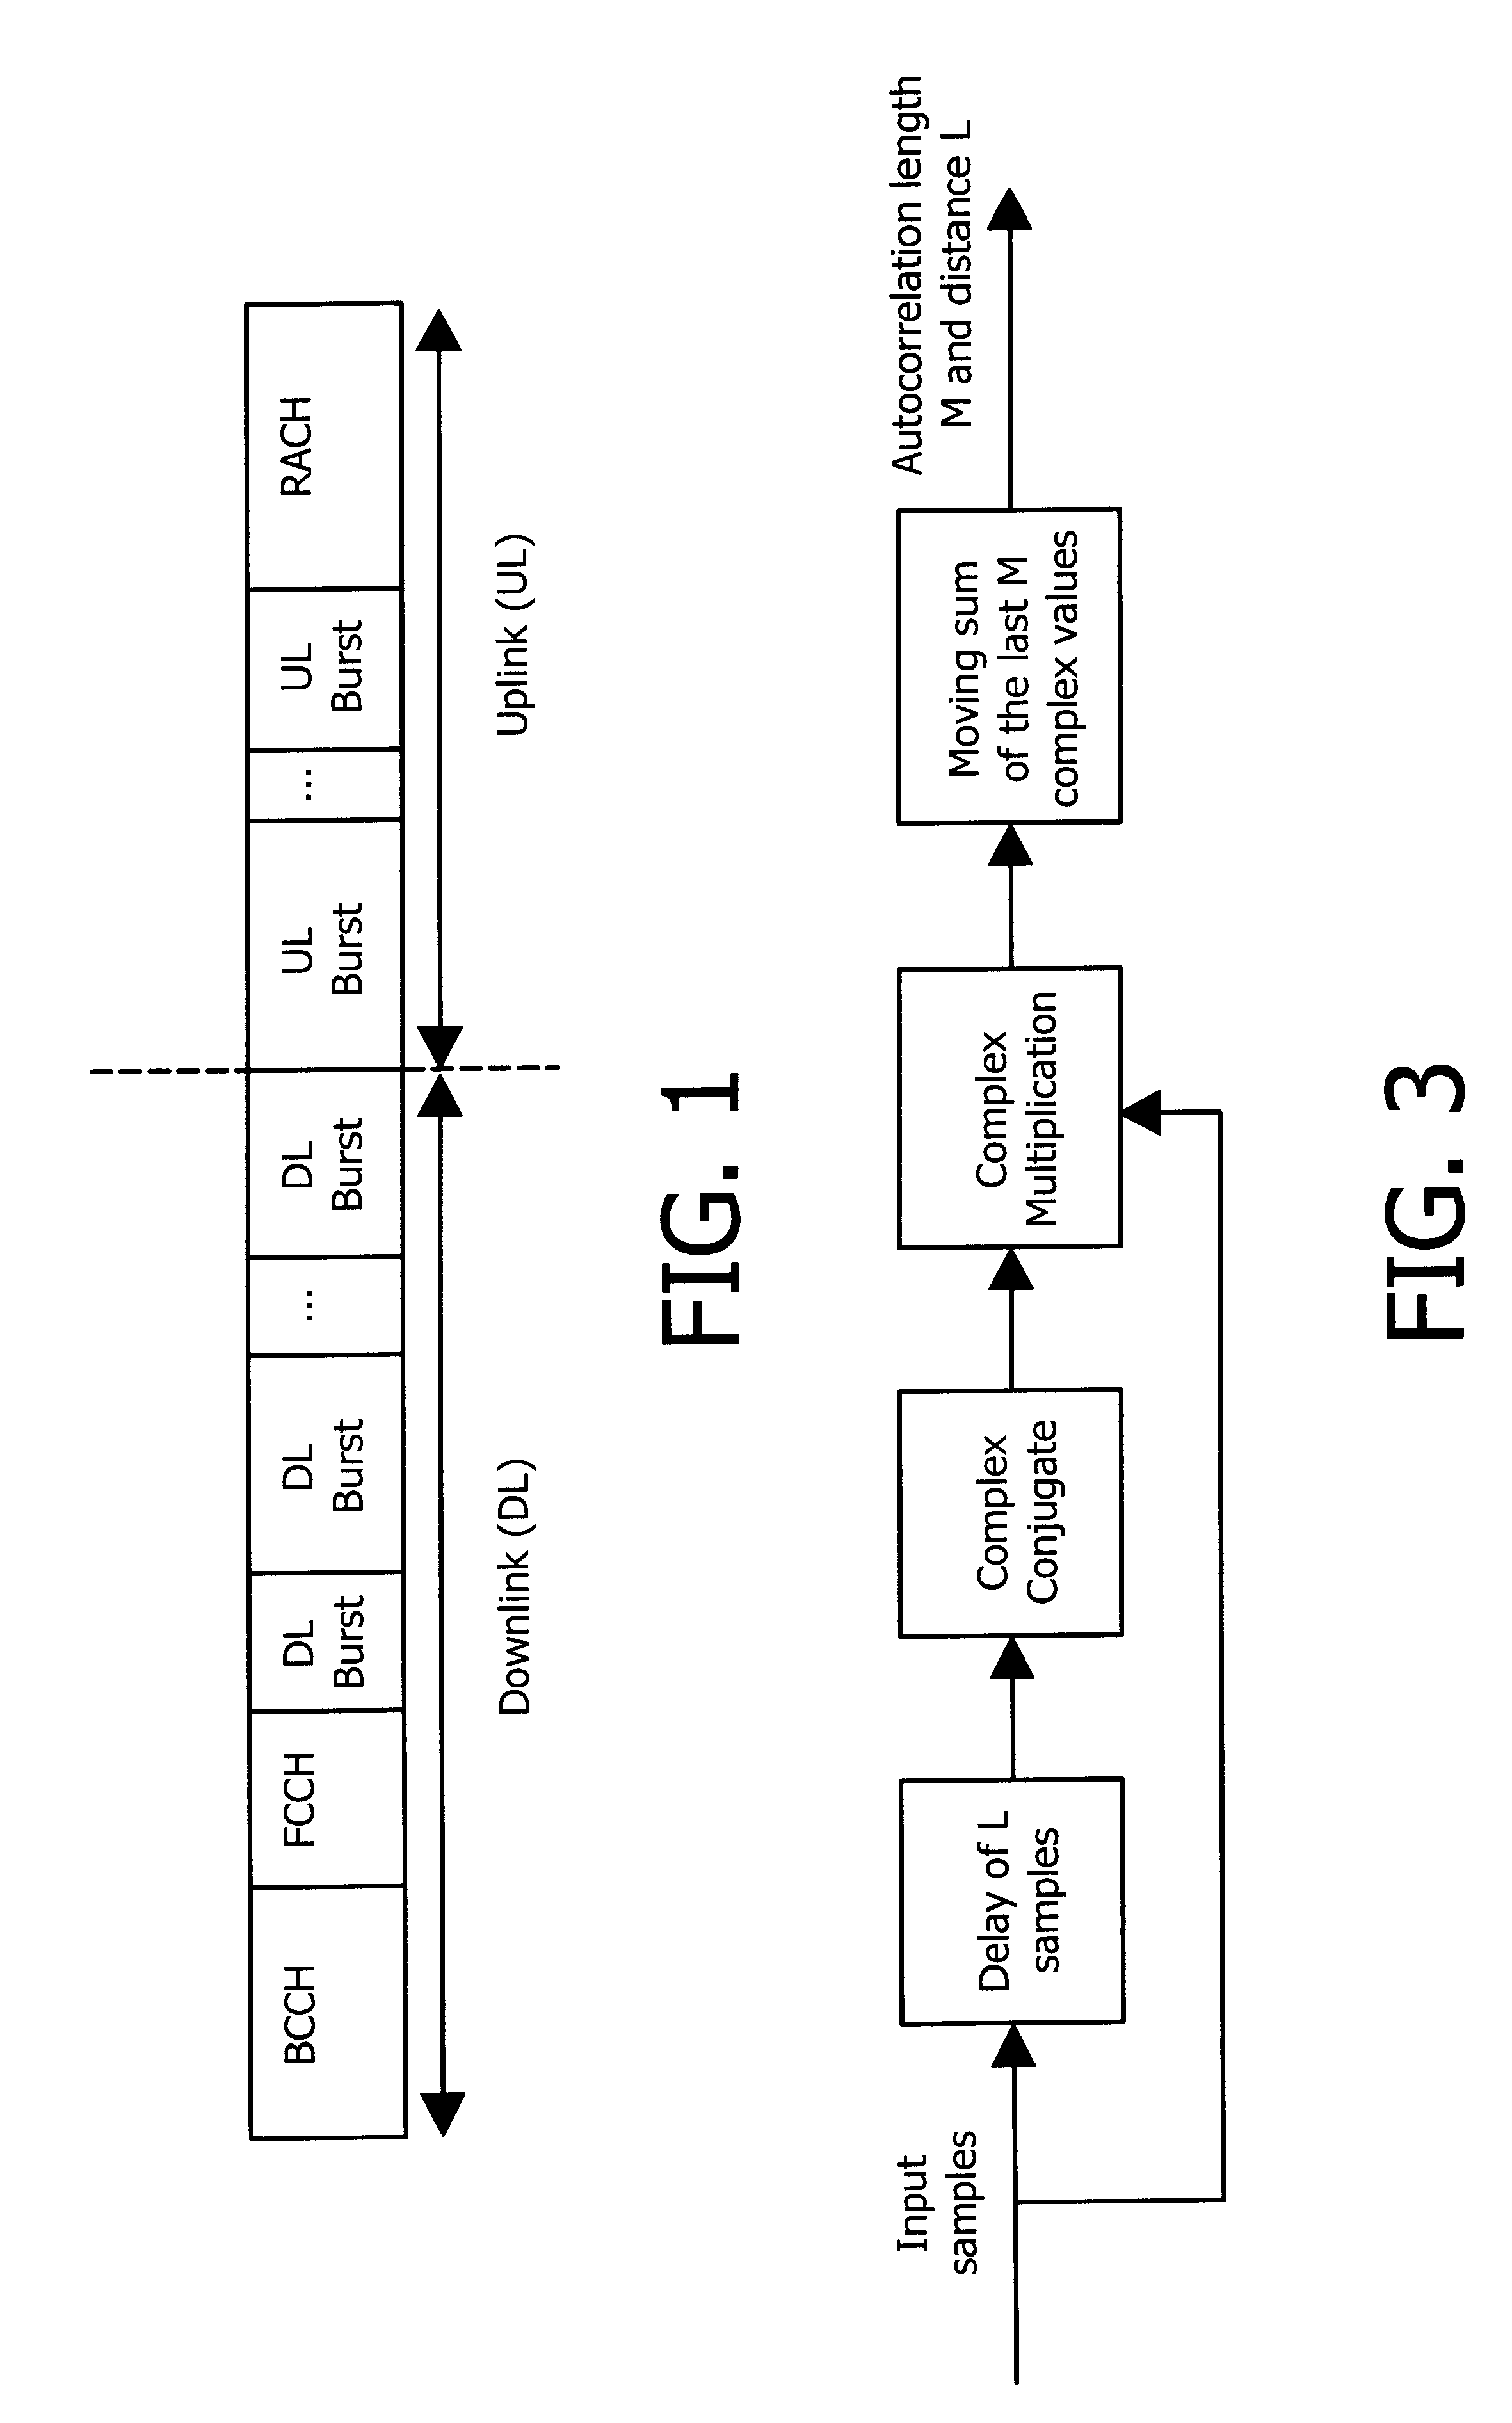 Method for efficient synchronization in a communication system